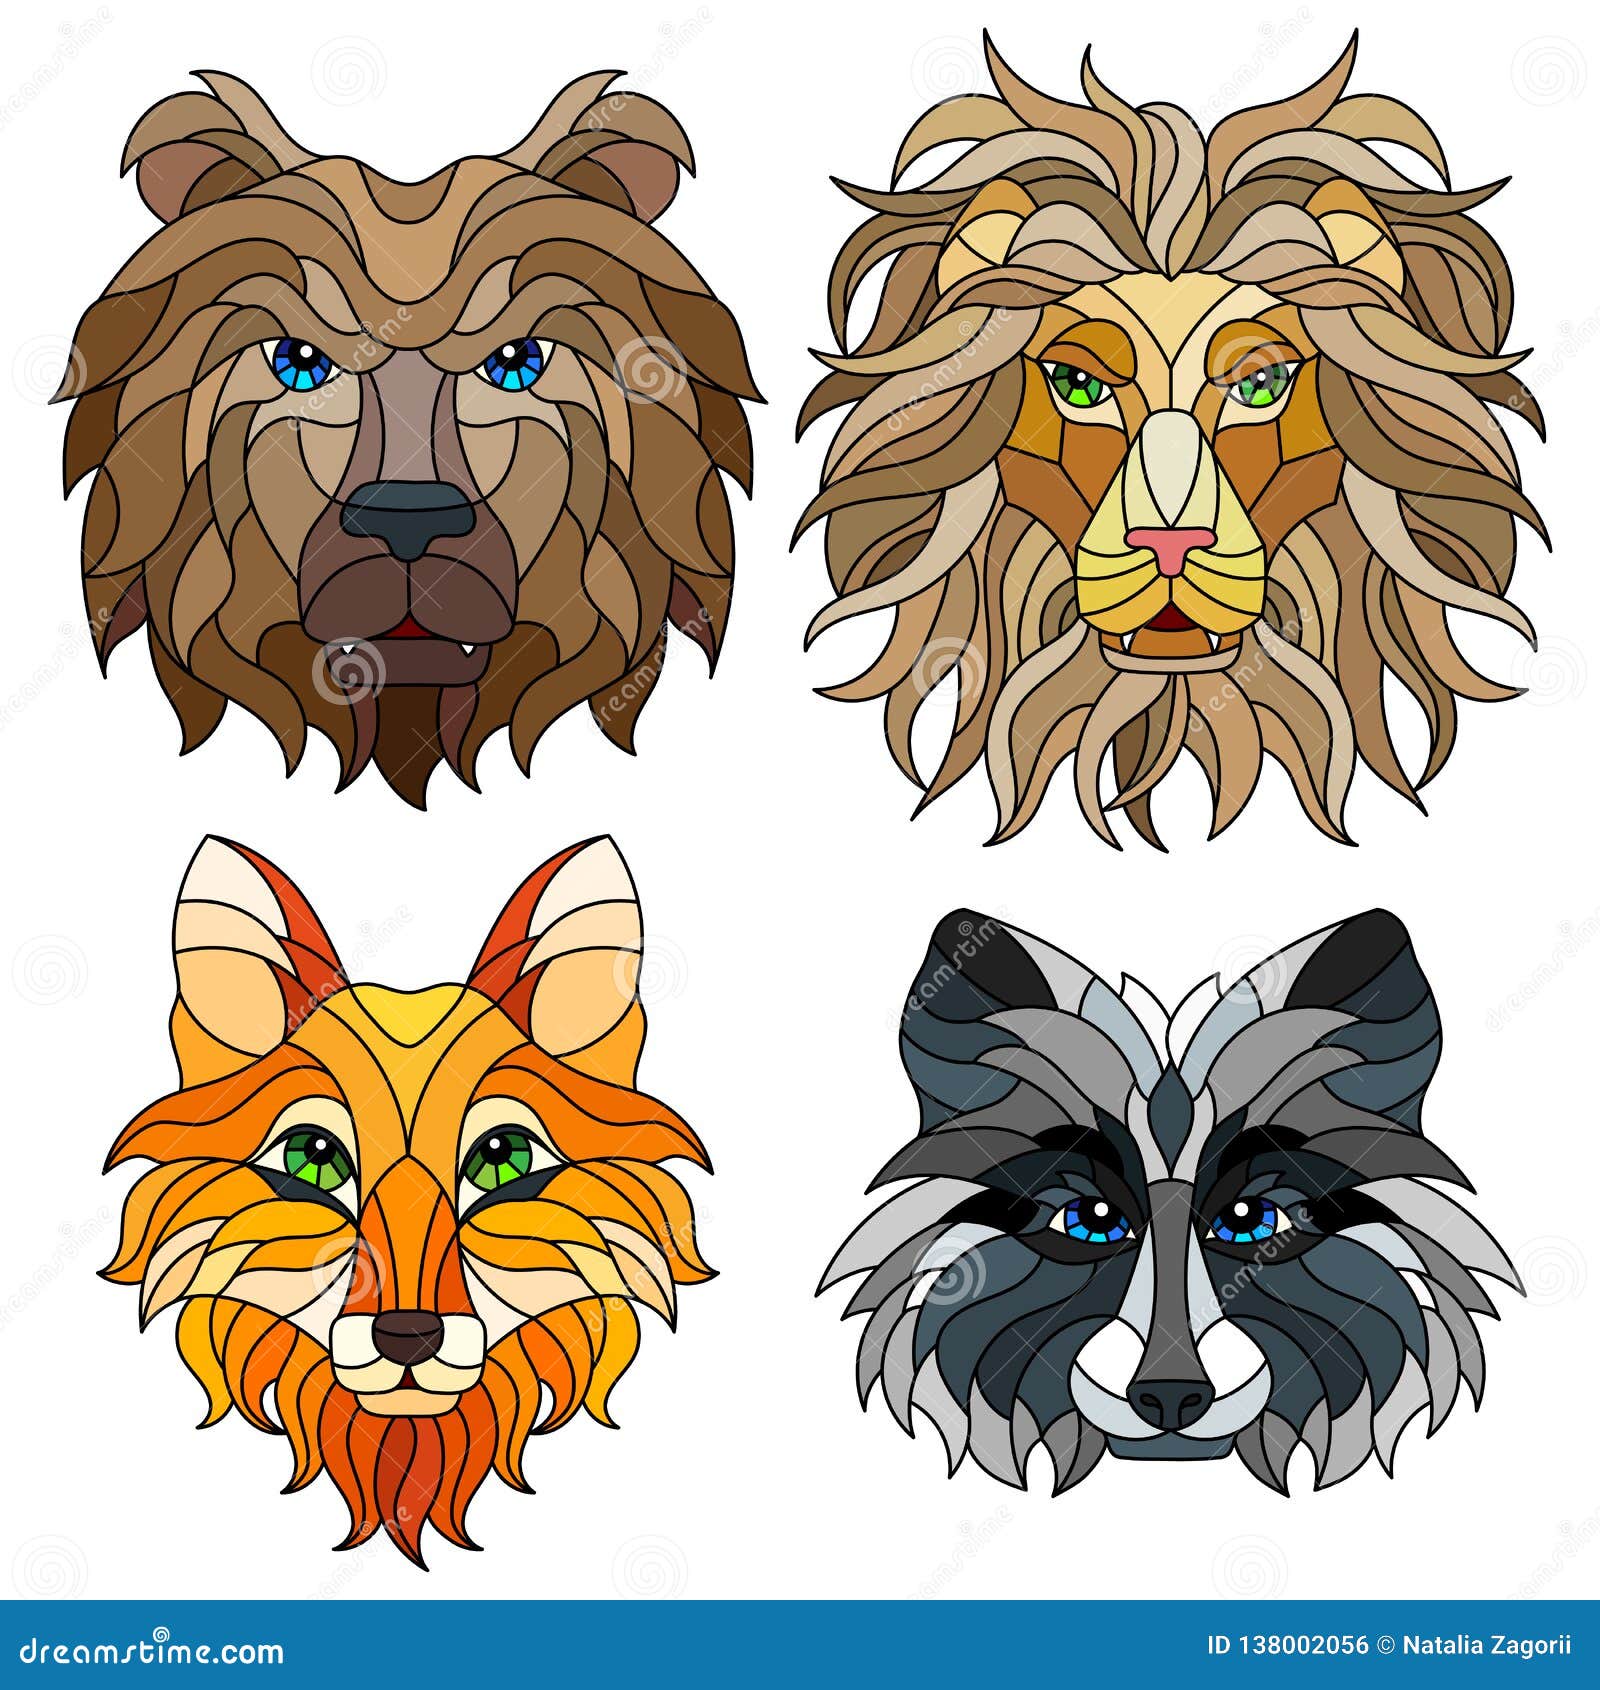 stained glass set with animal heads, a fox, a lion, a bear and a raccoon, isolates on white background